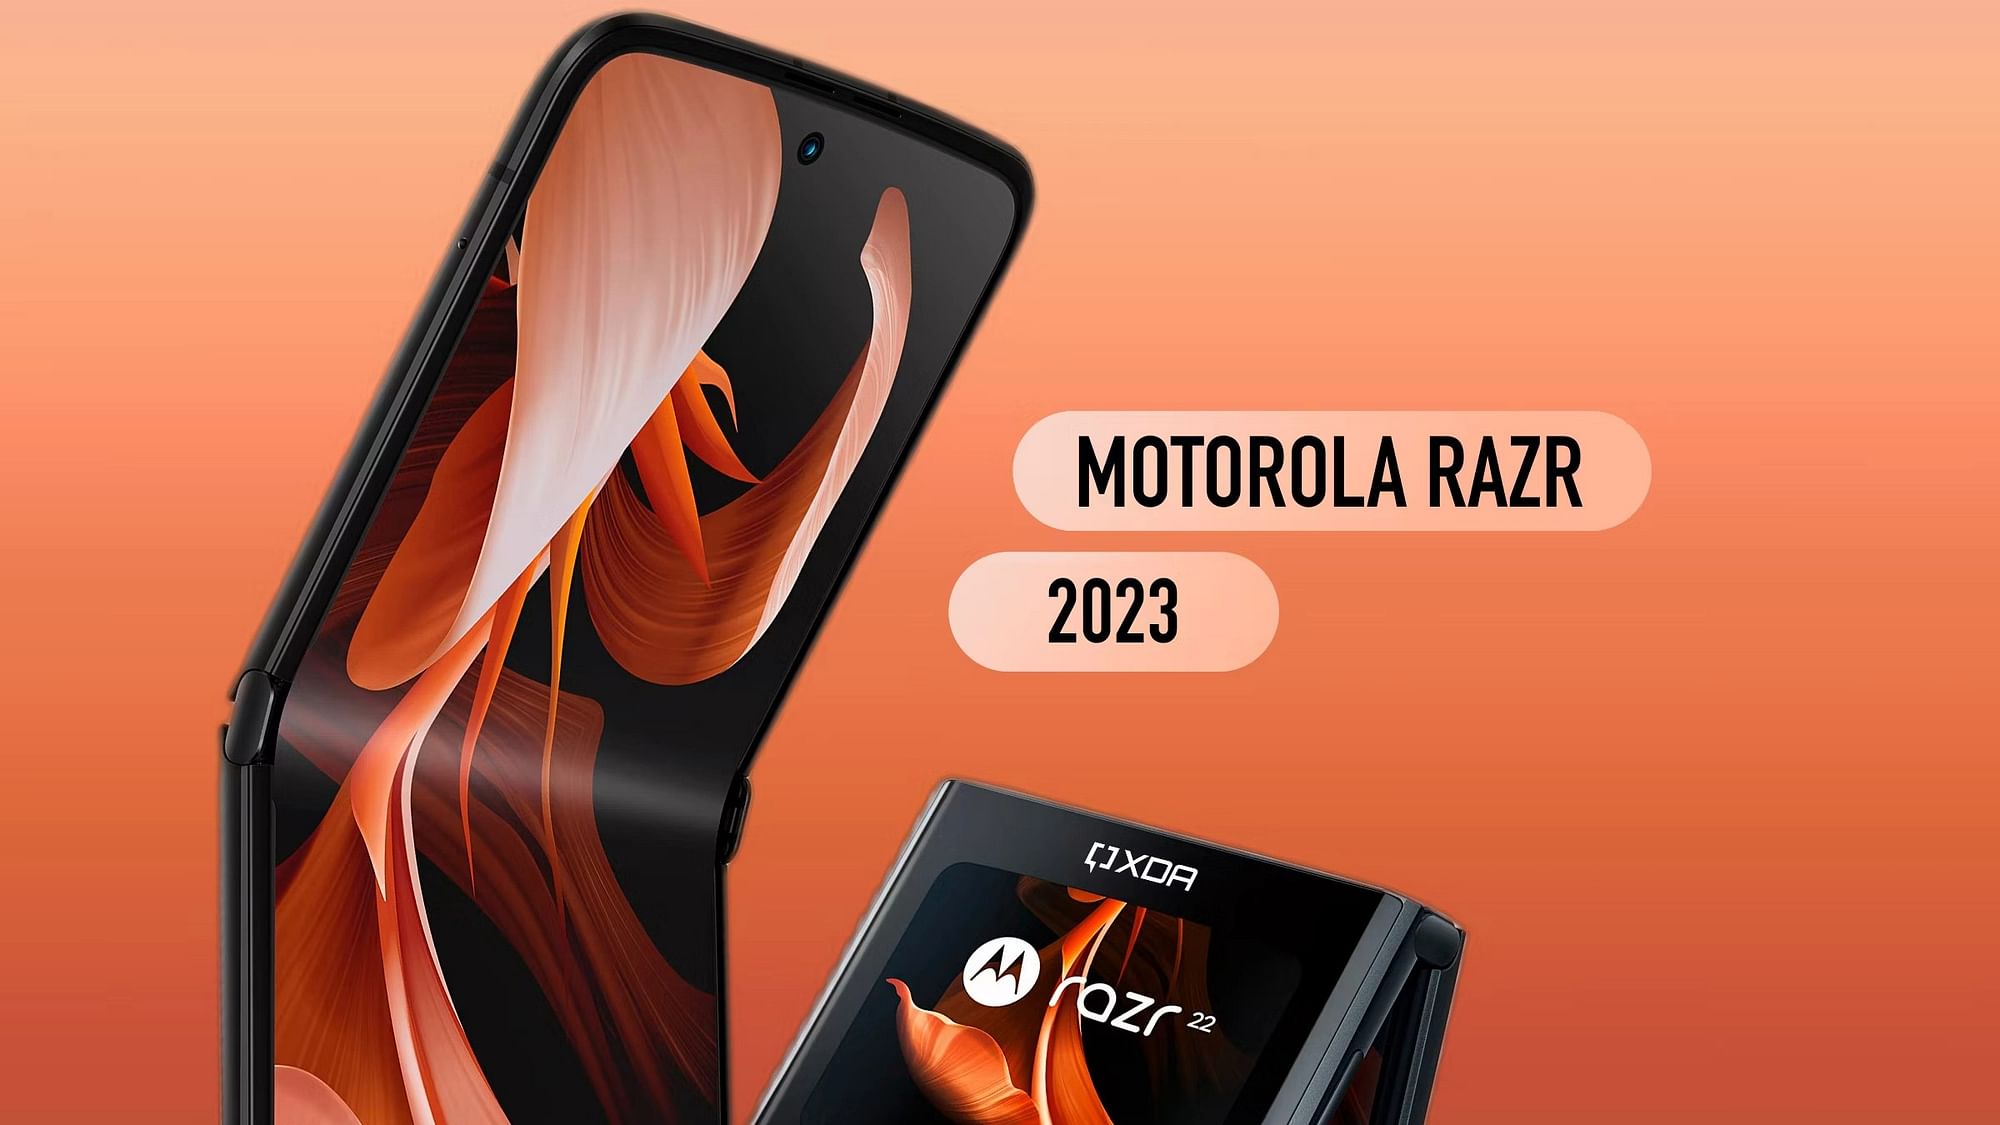 Motorola Razr 40 Price In India Leaked On  Ahead Of Launch On July 3:  Details - News18